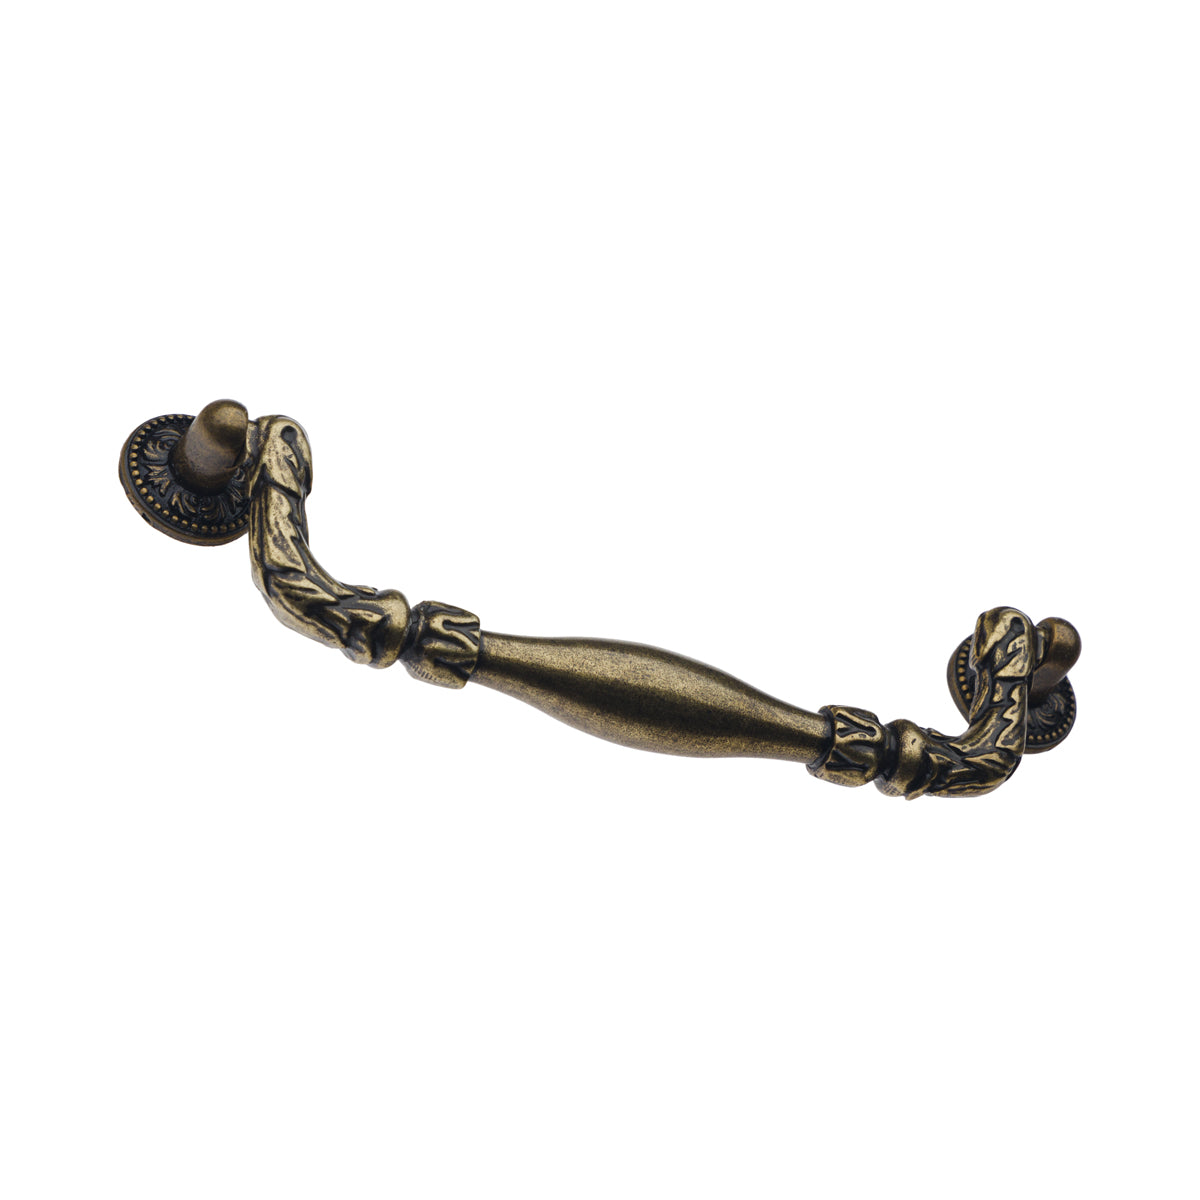 acanthus-drop-handle-ant-brass-128mm